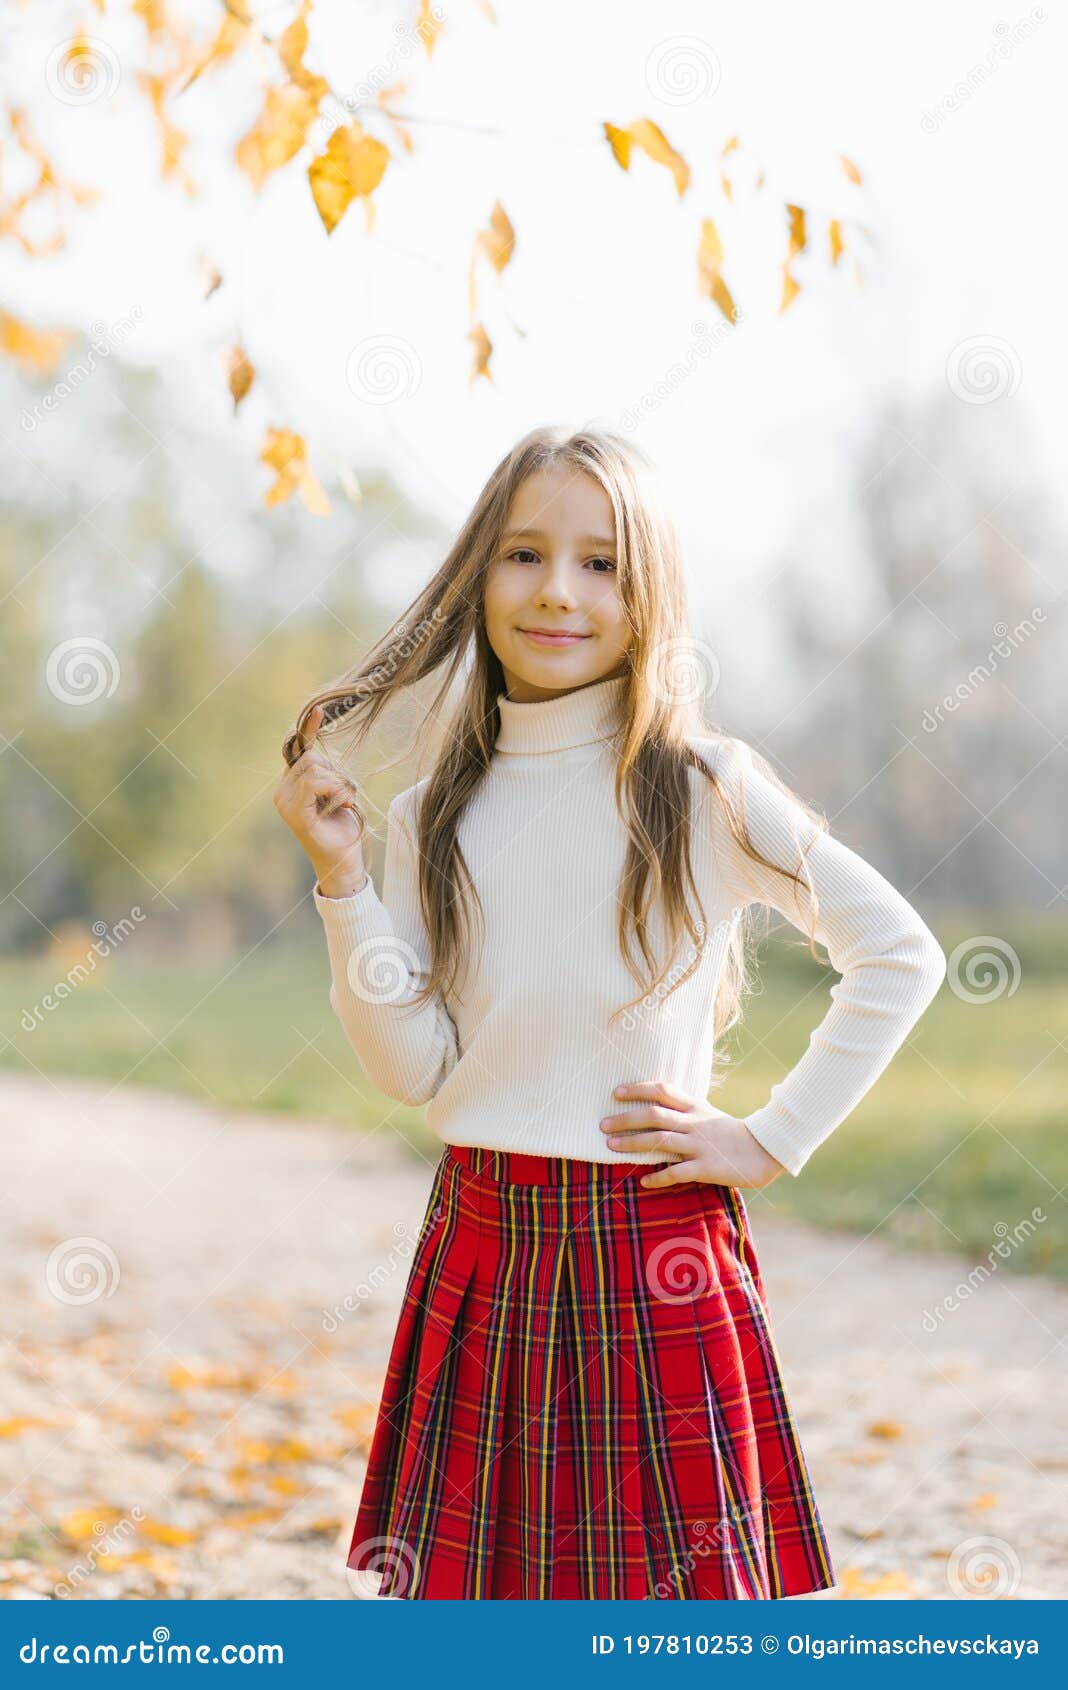 Preschooler Little Girl in a White Sweater and Red Plaid Skirt with ...